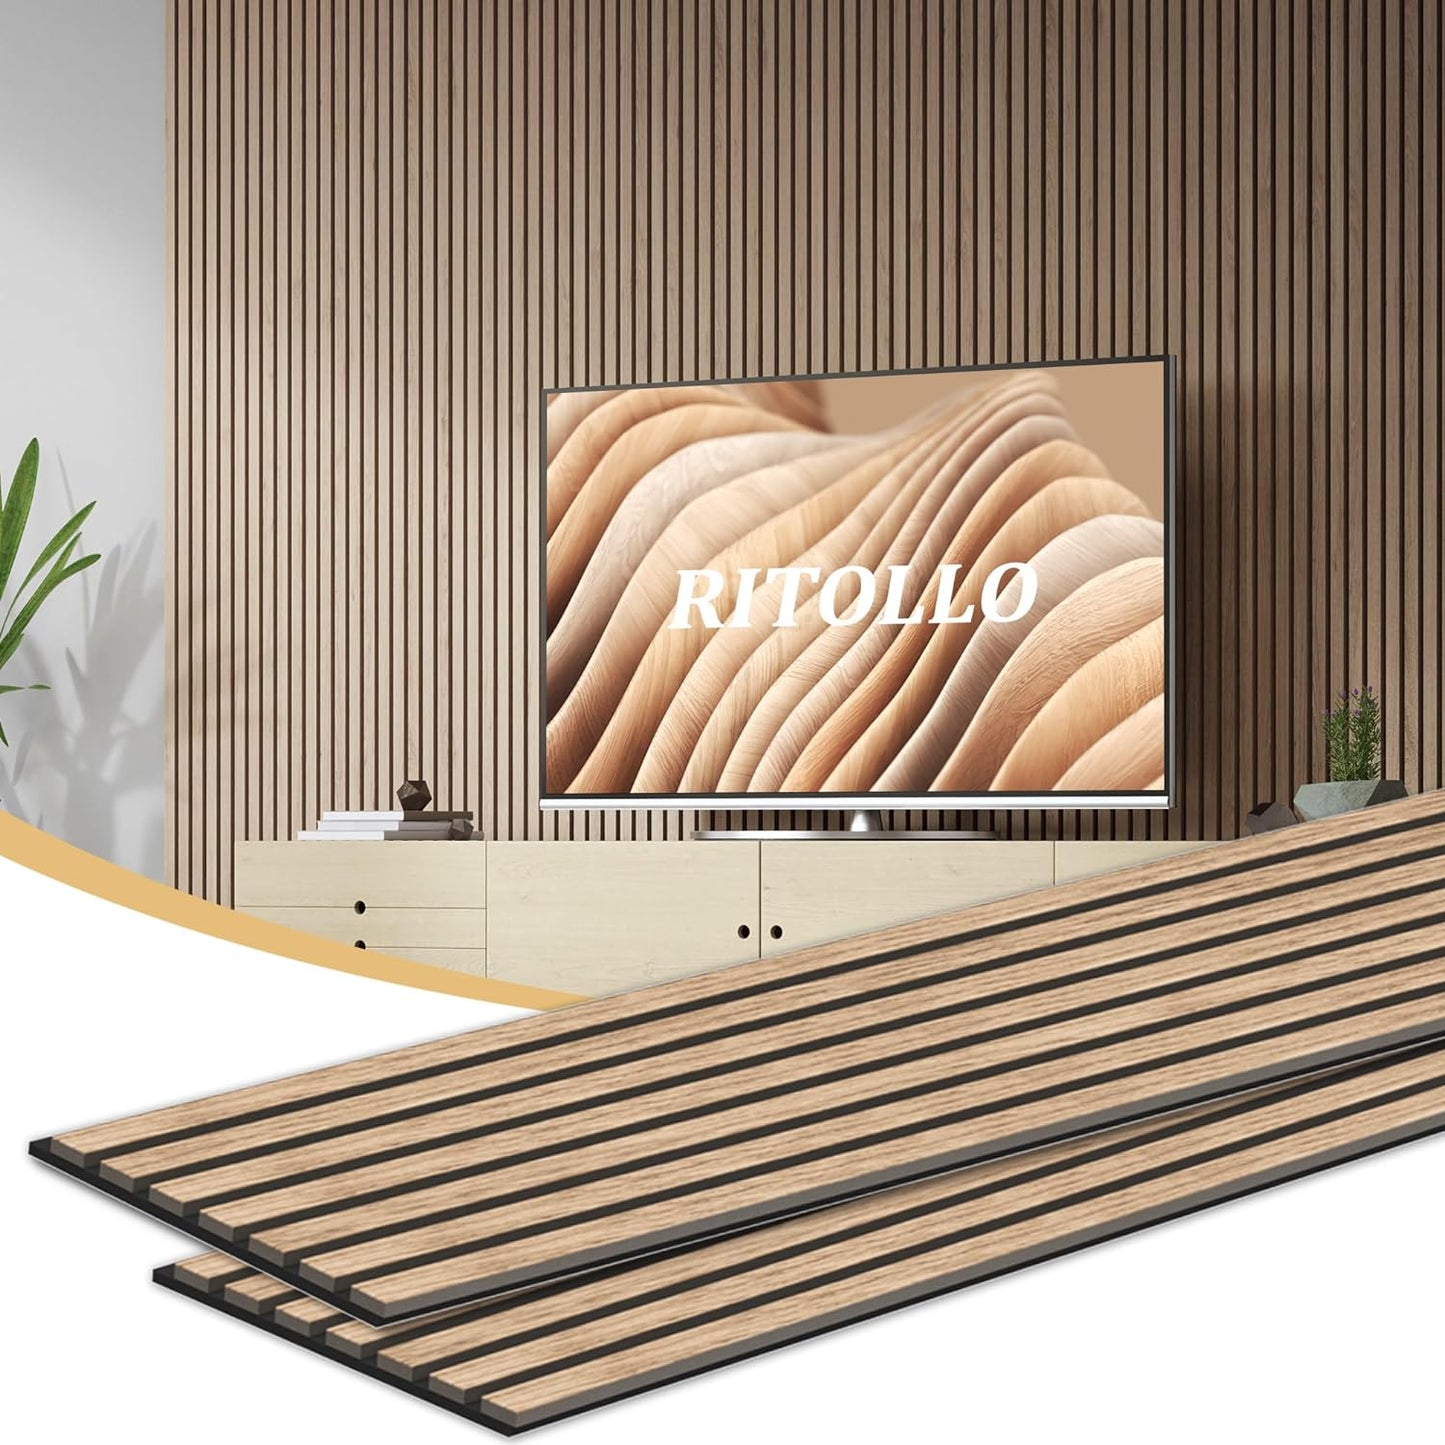 2pcs Wooden Slat Acoustic Panels for Walls and Ceiling, 94.5"×11" Decorative Wall Panels, 3D Fluted Sound Absorbing Panel